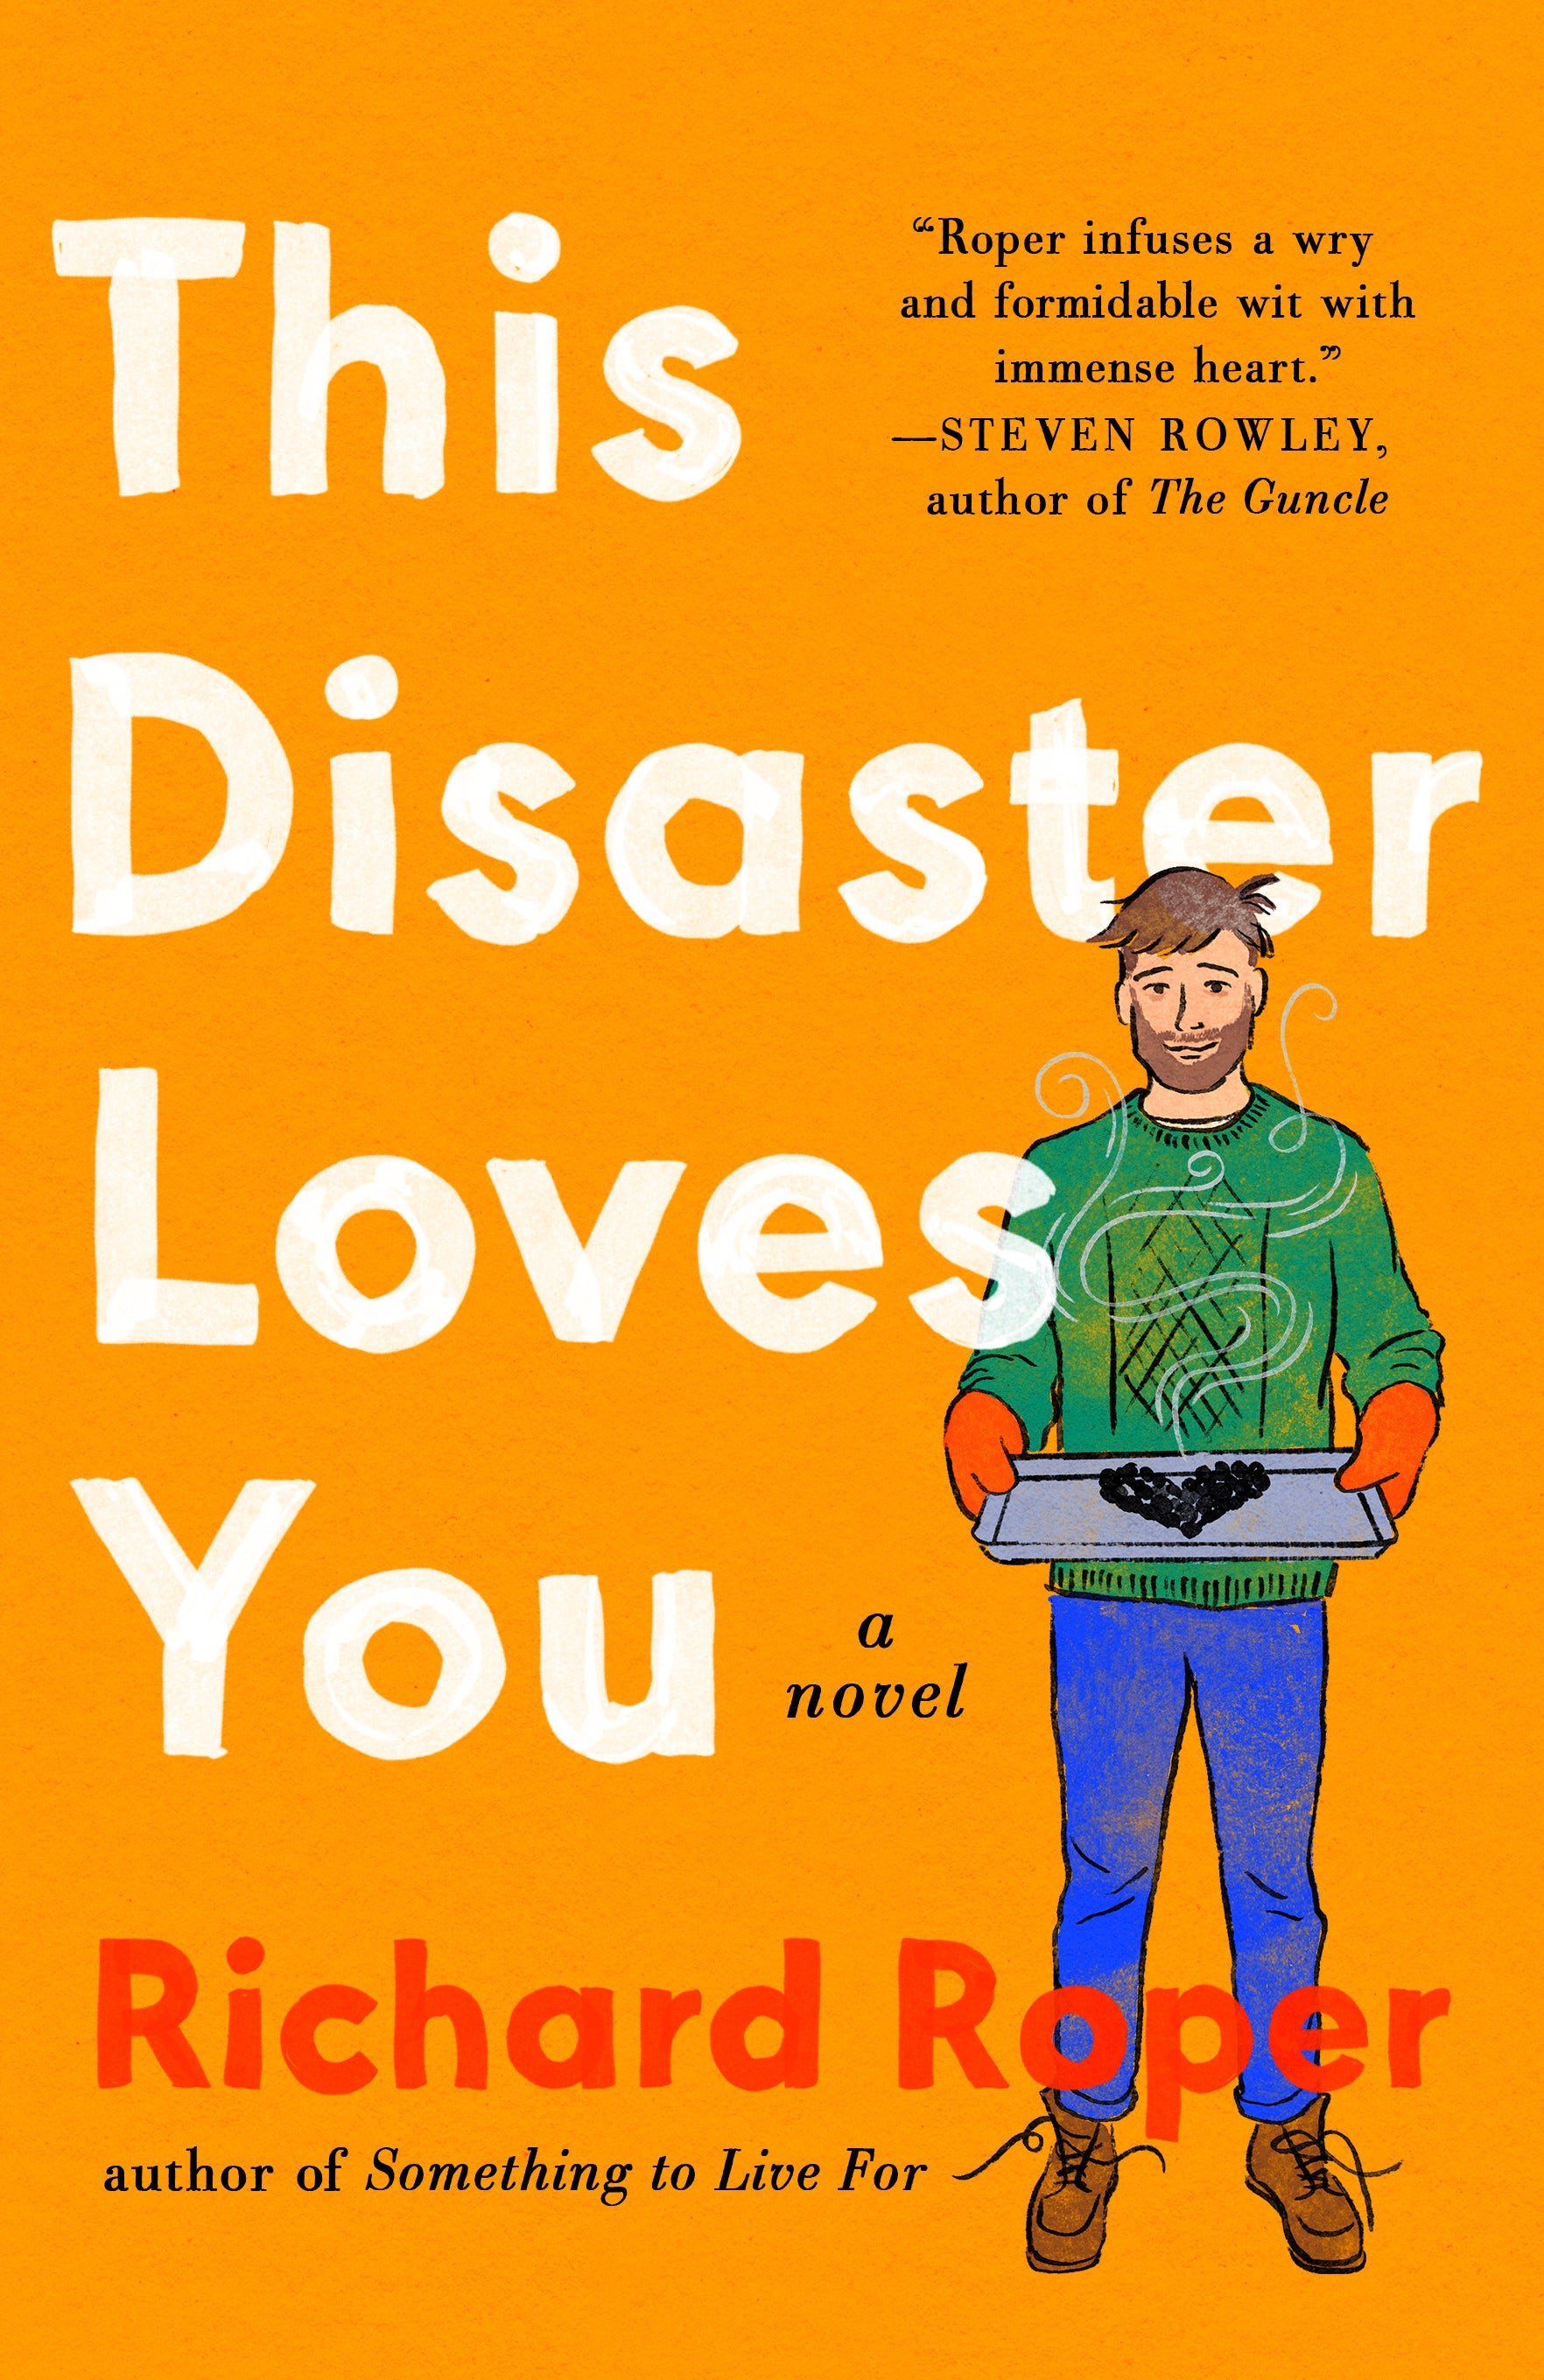 Book Review - This Disaster Loves You